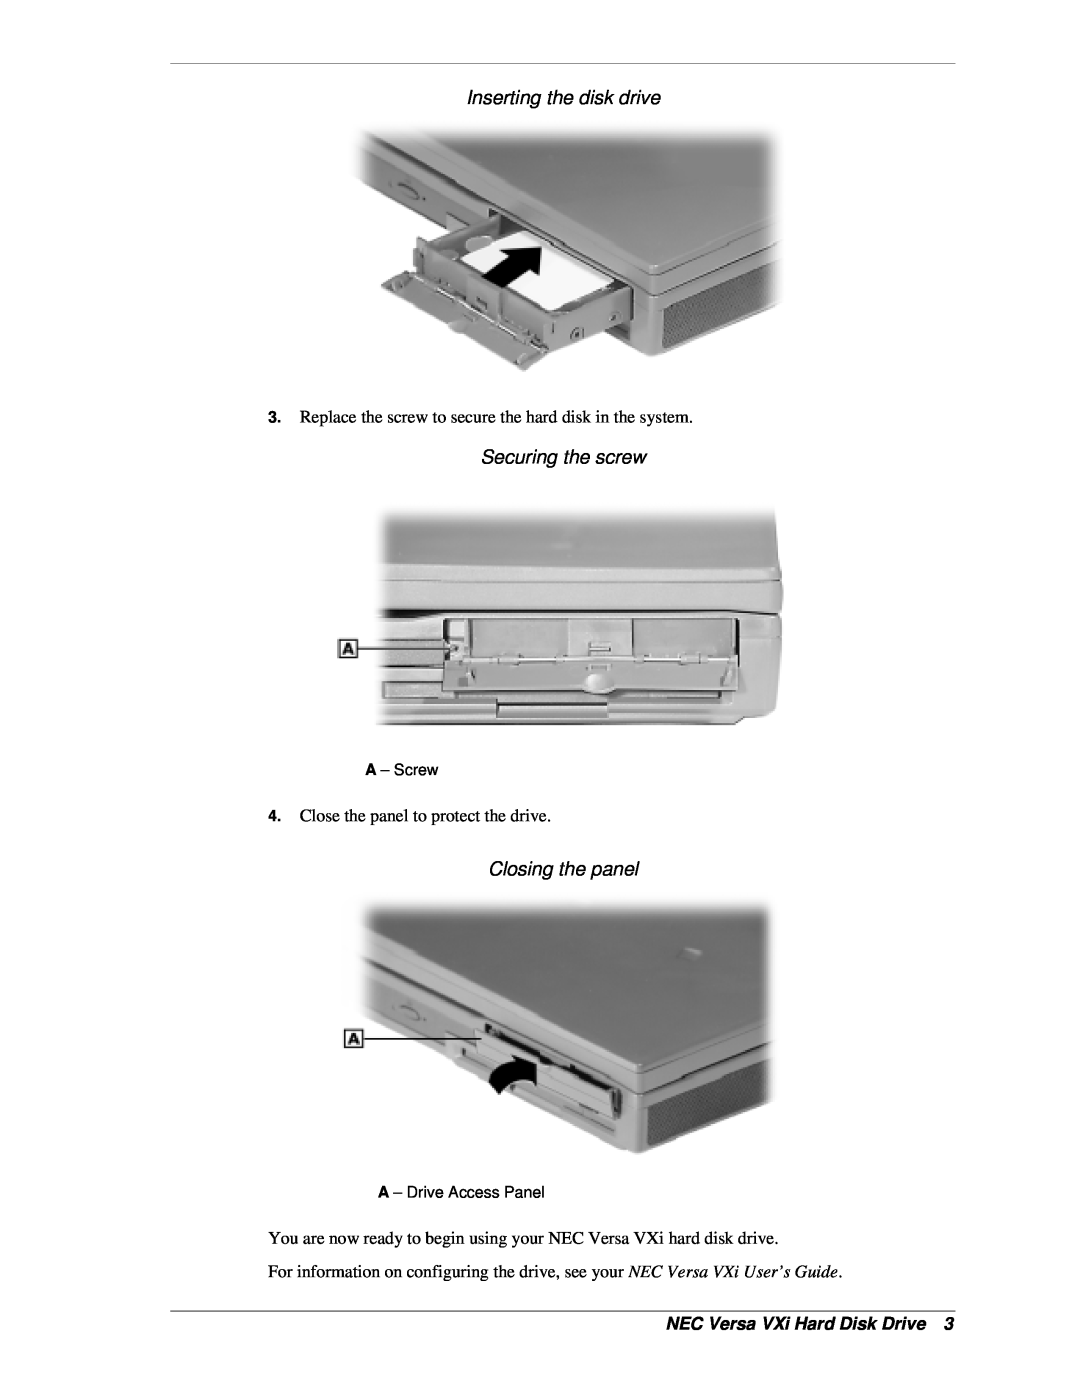 NEC OP-220-73001 manual Inserting the disk drive, Securing the screw, Closing the panel, NEC Versa VXi Hard Disk Drive 